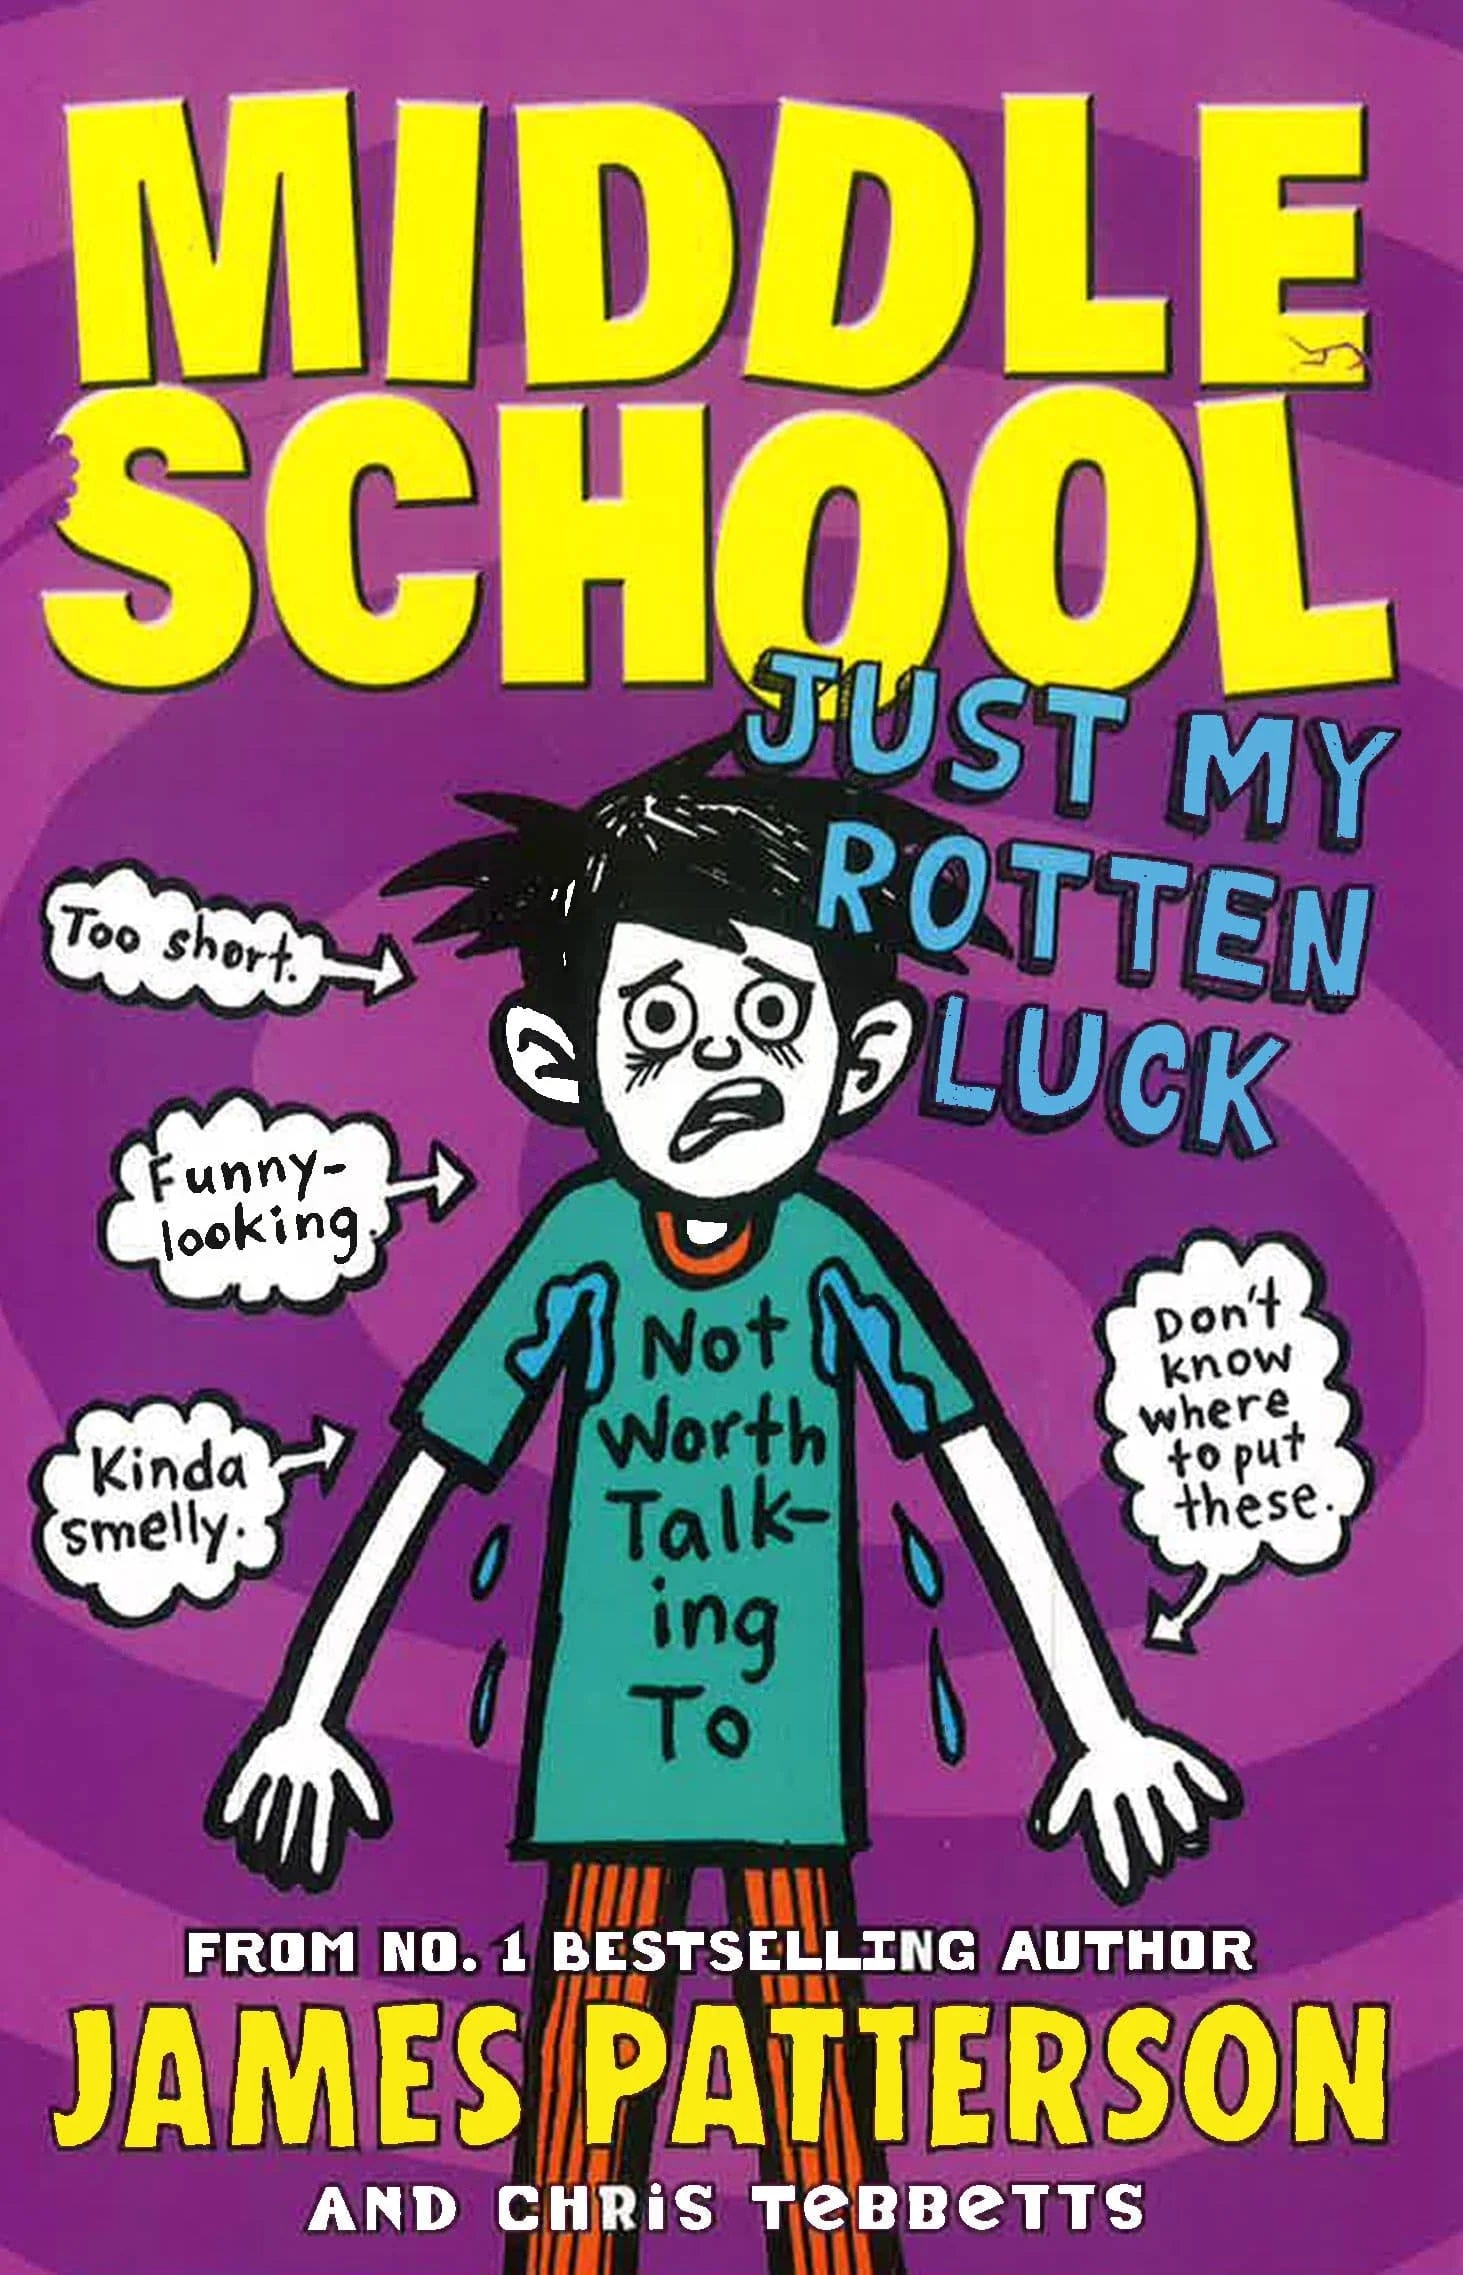 Patterson, James BARGAIN CHILDRENS FICTION Good MIDDLE SCHOOL JUST MY ROTTEN LUCK P/B Z44